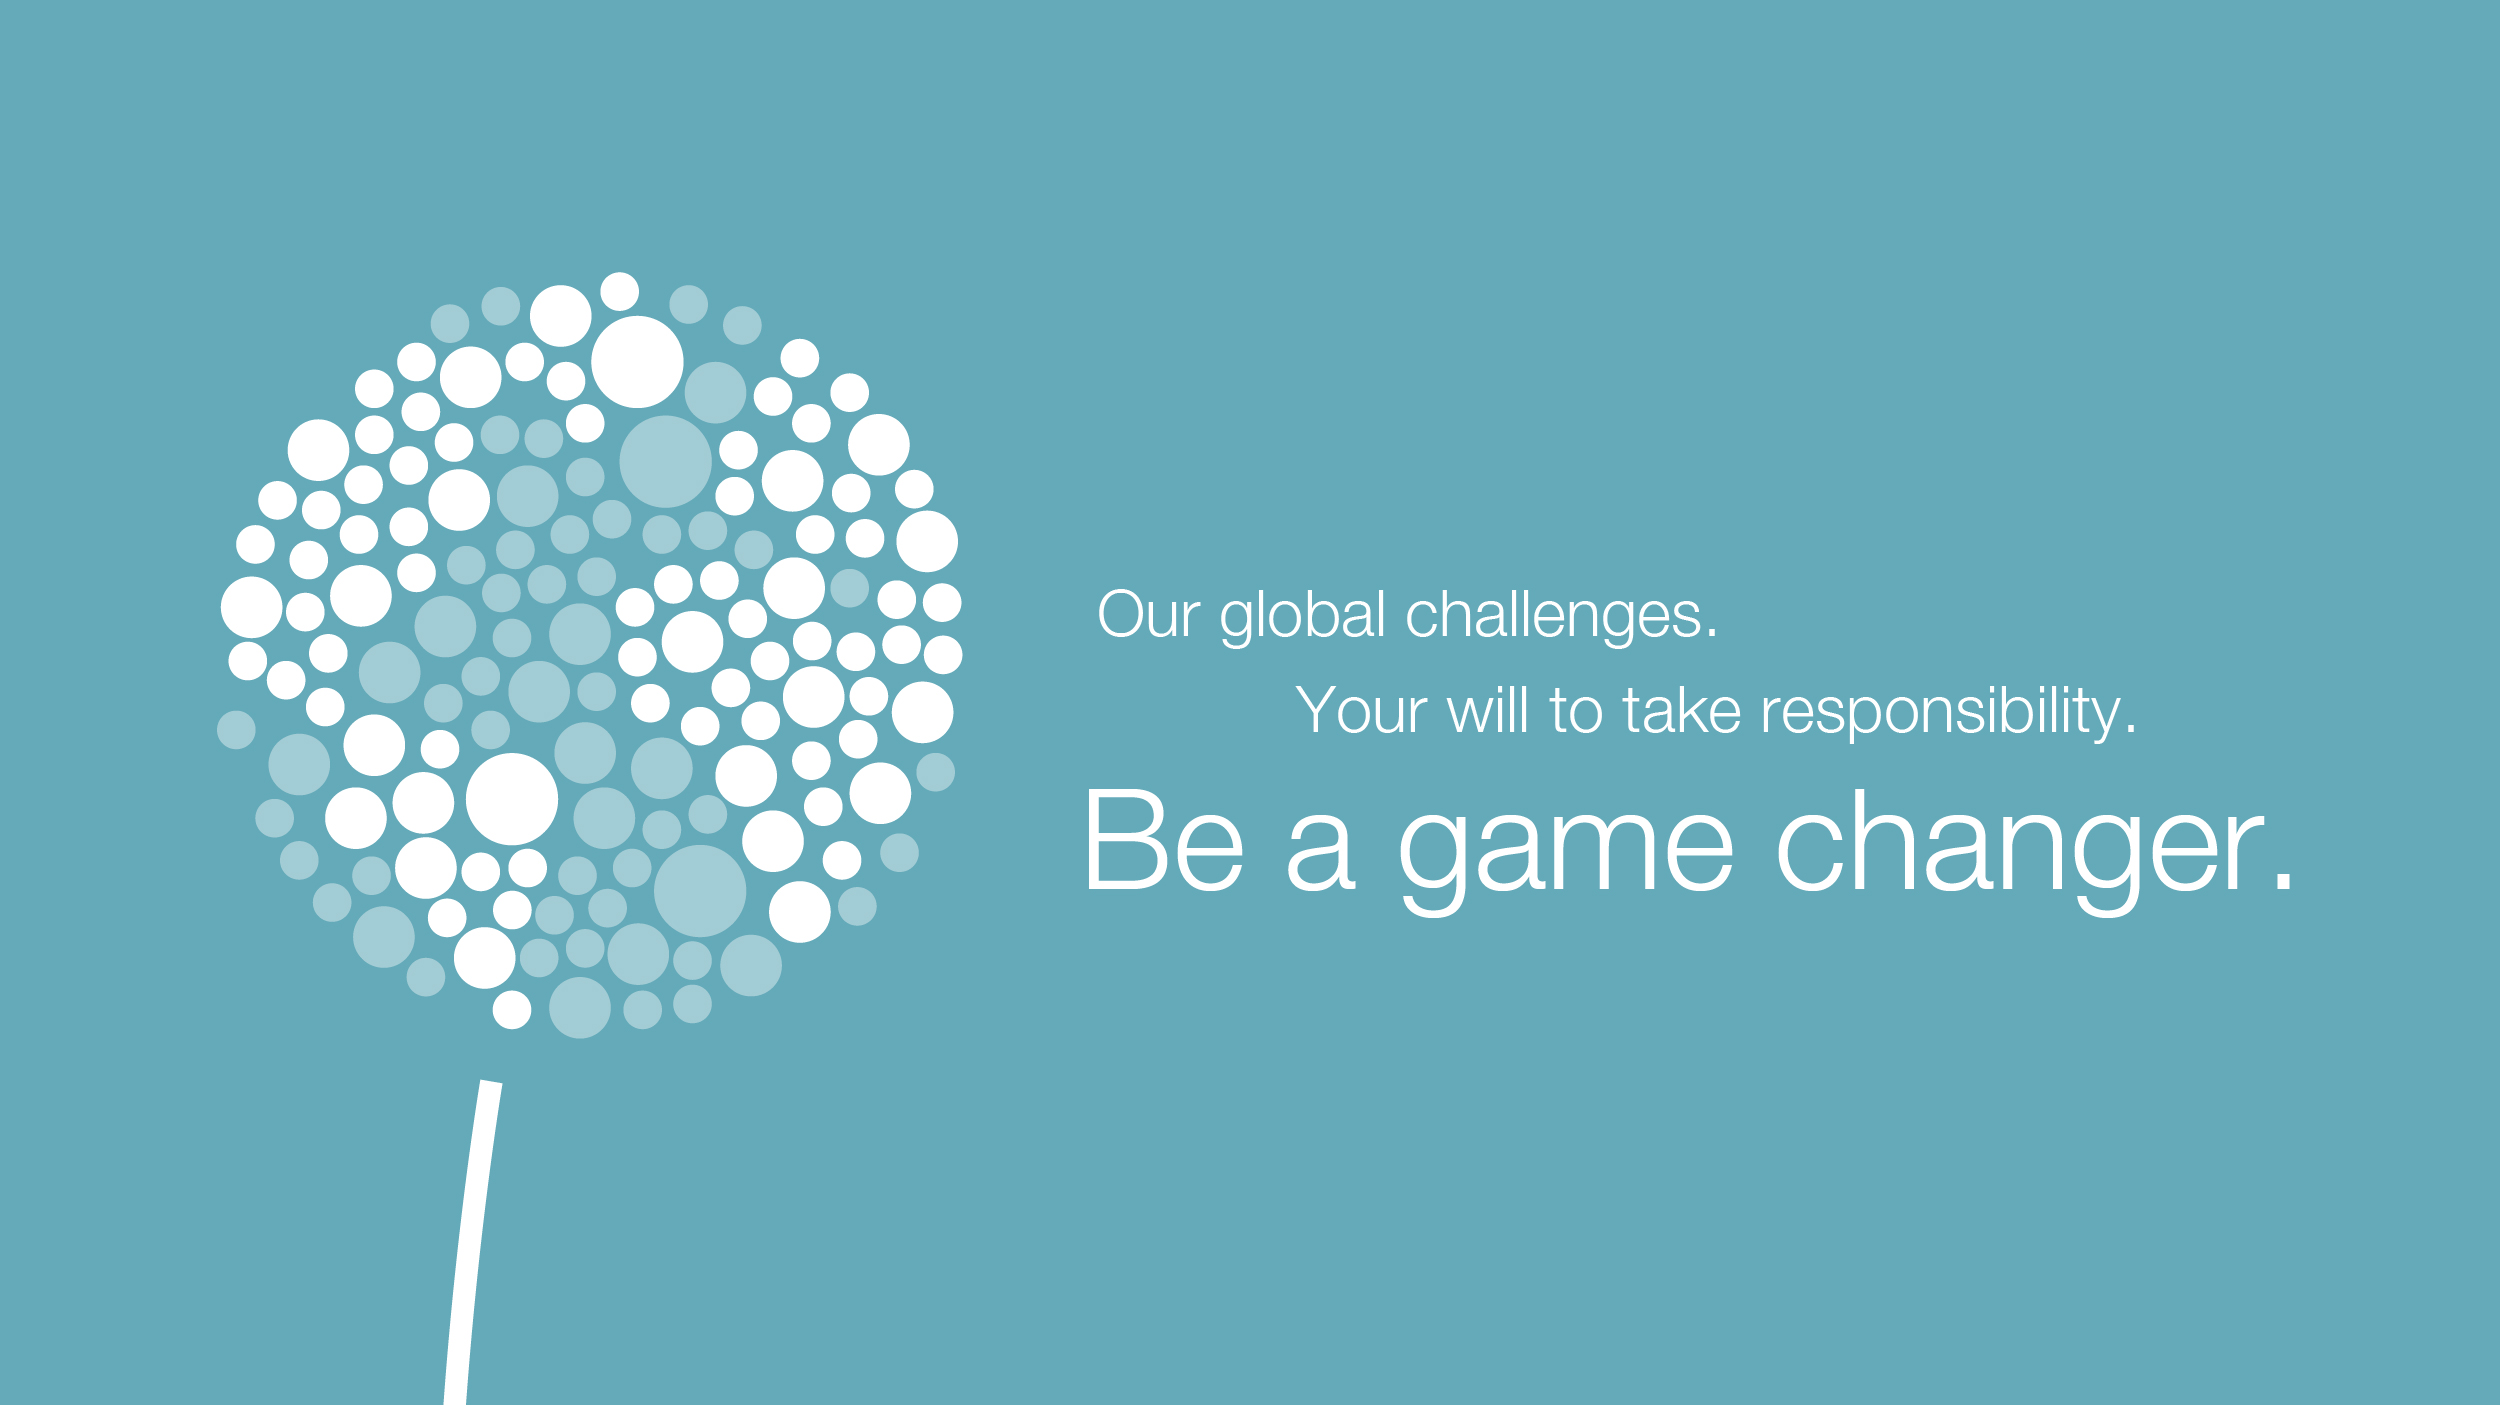 Dandelion of icons in a globe form, beside the slogan: Our global challenges Your willingness to take responsibility